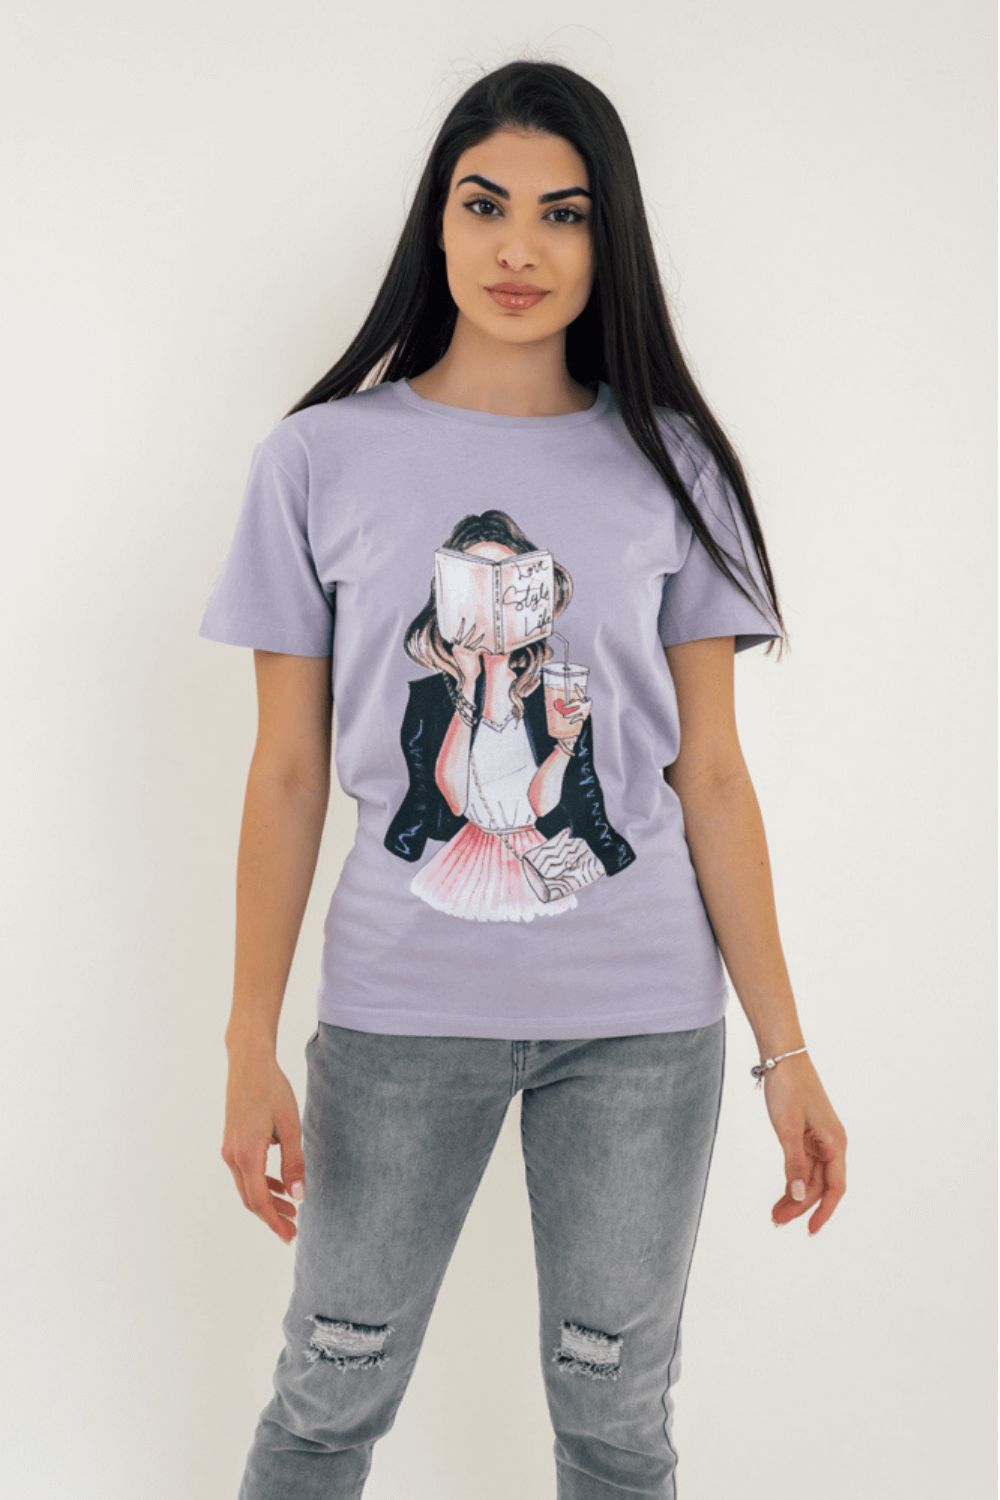 T-Shirt "A Girl With A Book"